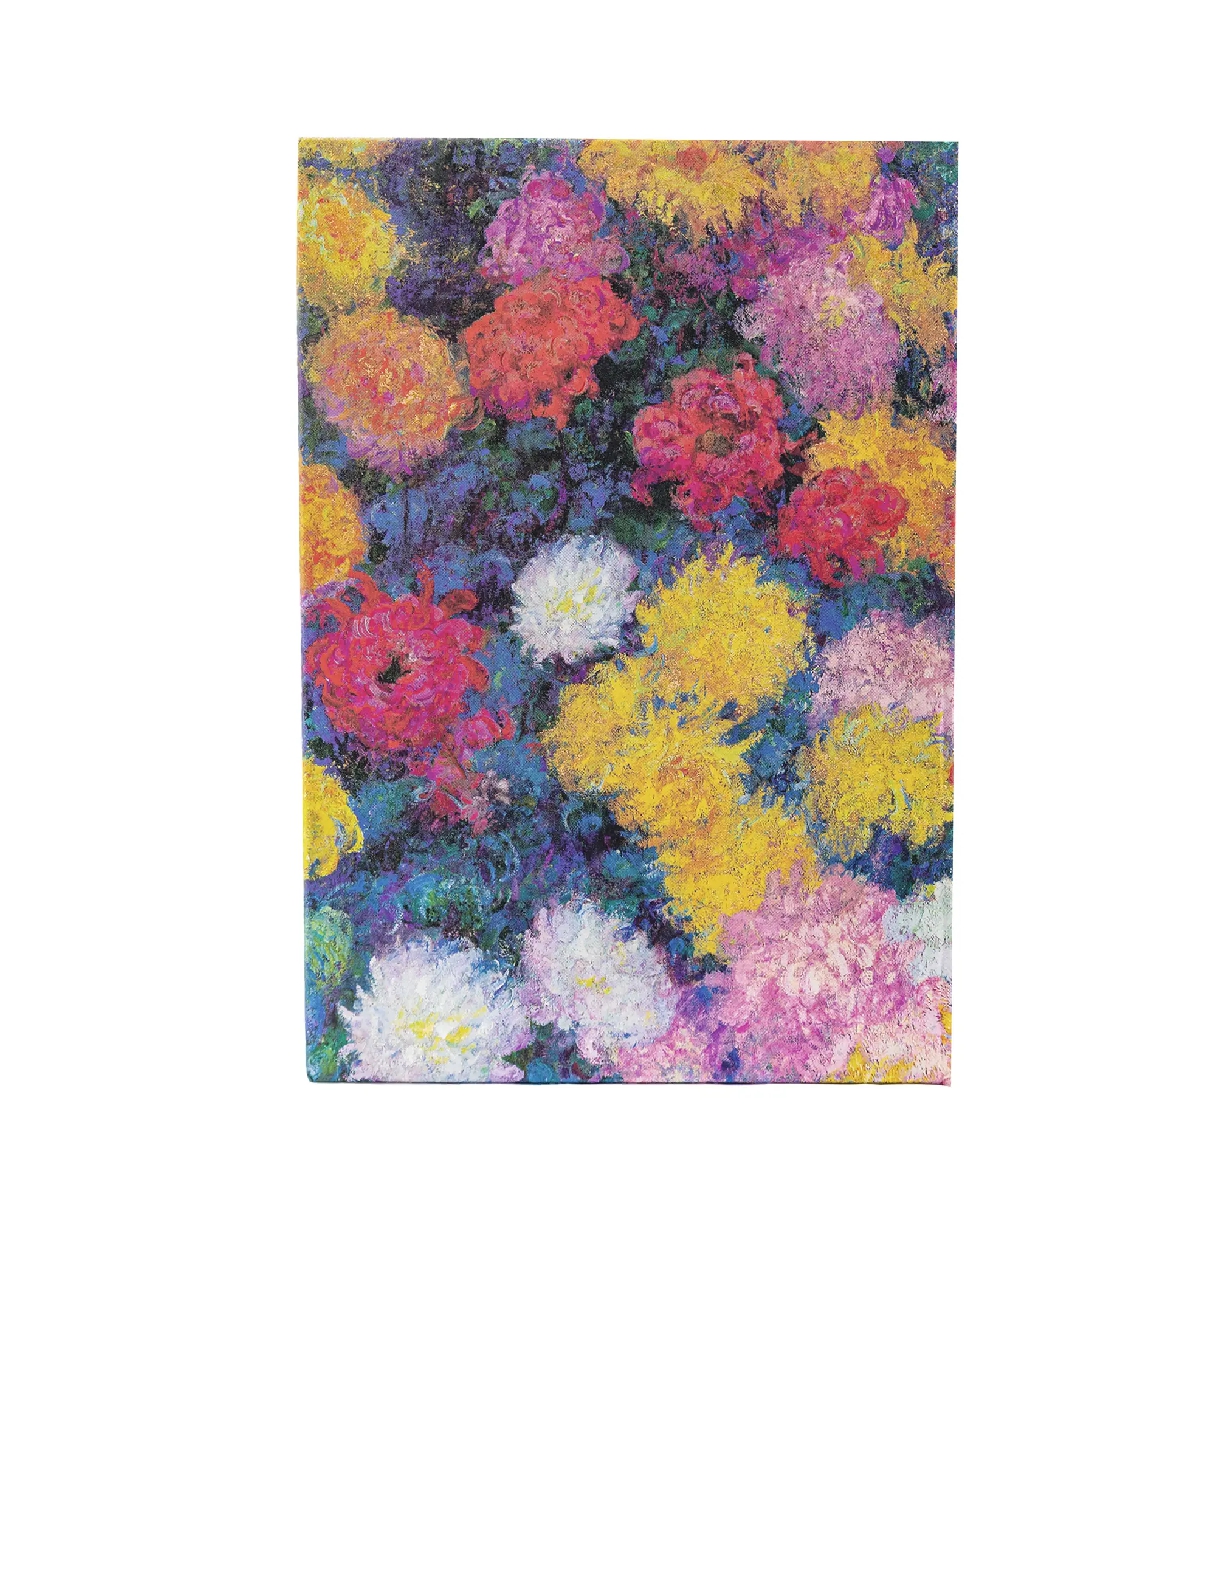 Monet's Chrysanthemums, Hardcover Journals, Midi, Lined, Elastic Band, 144 Pg, 120 GSM